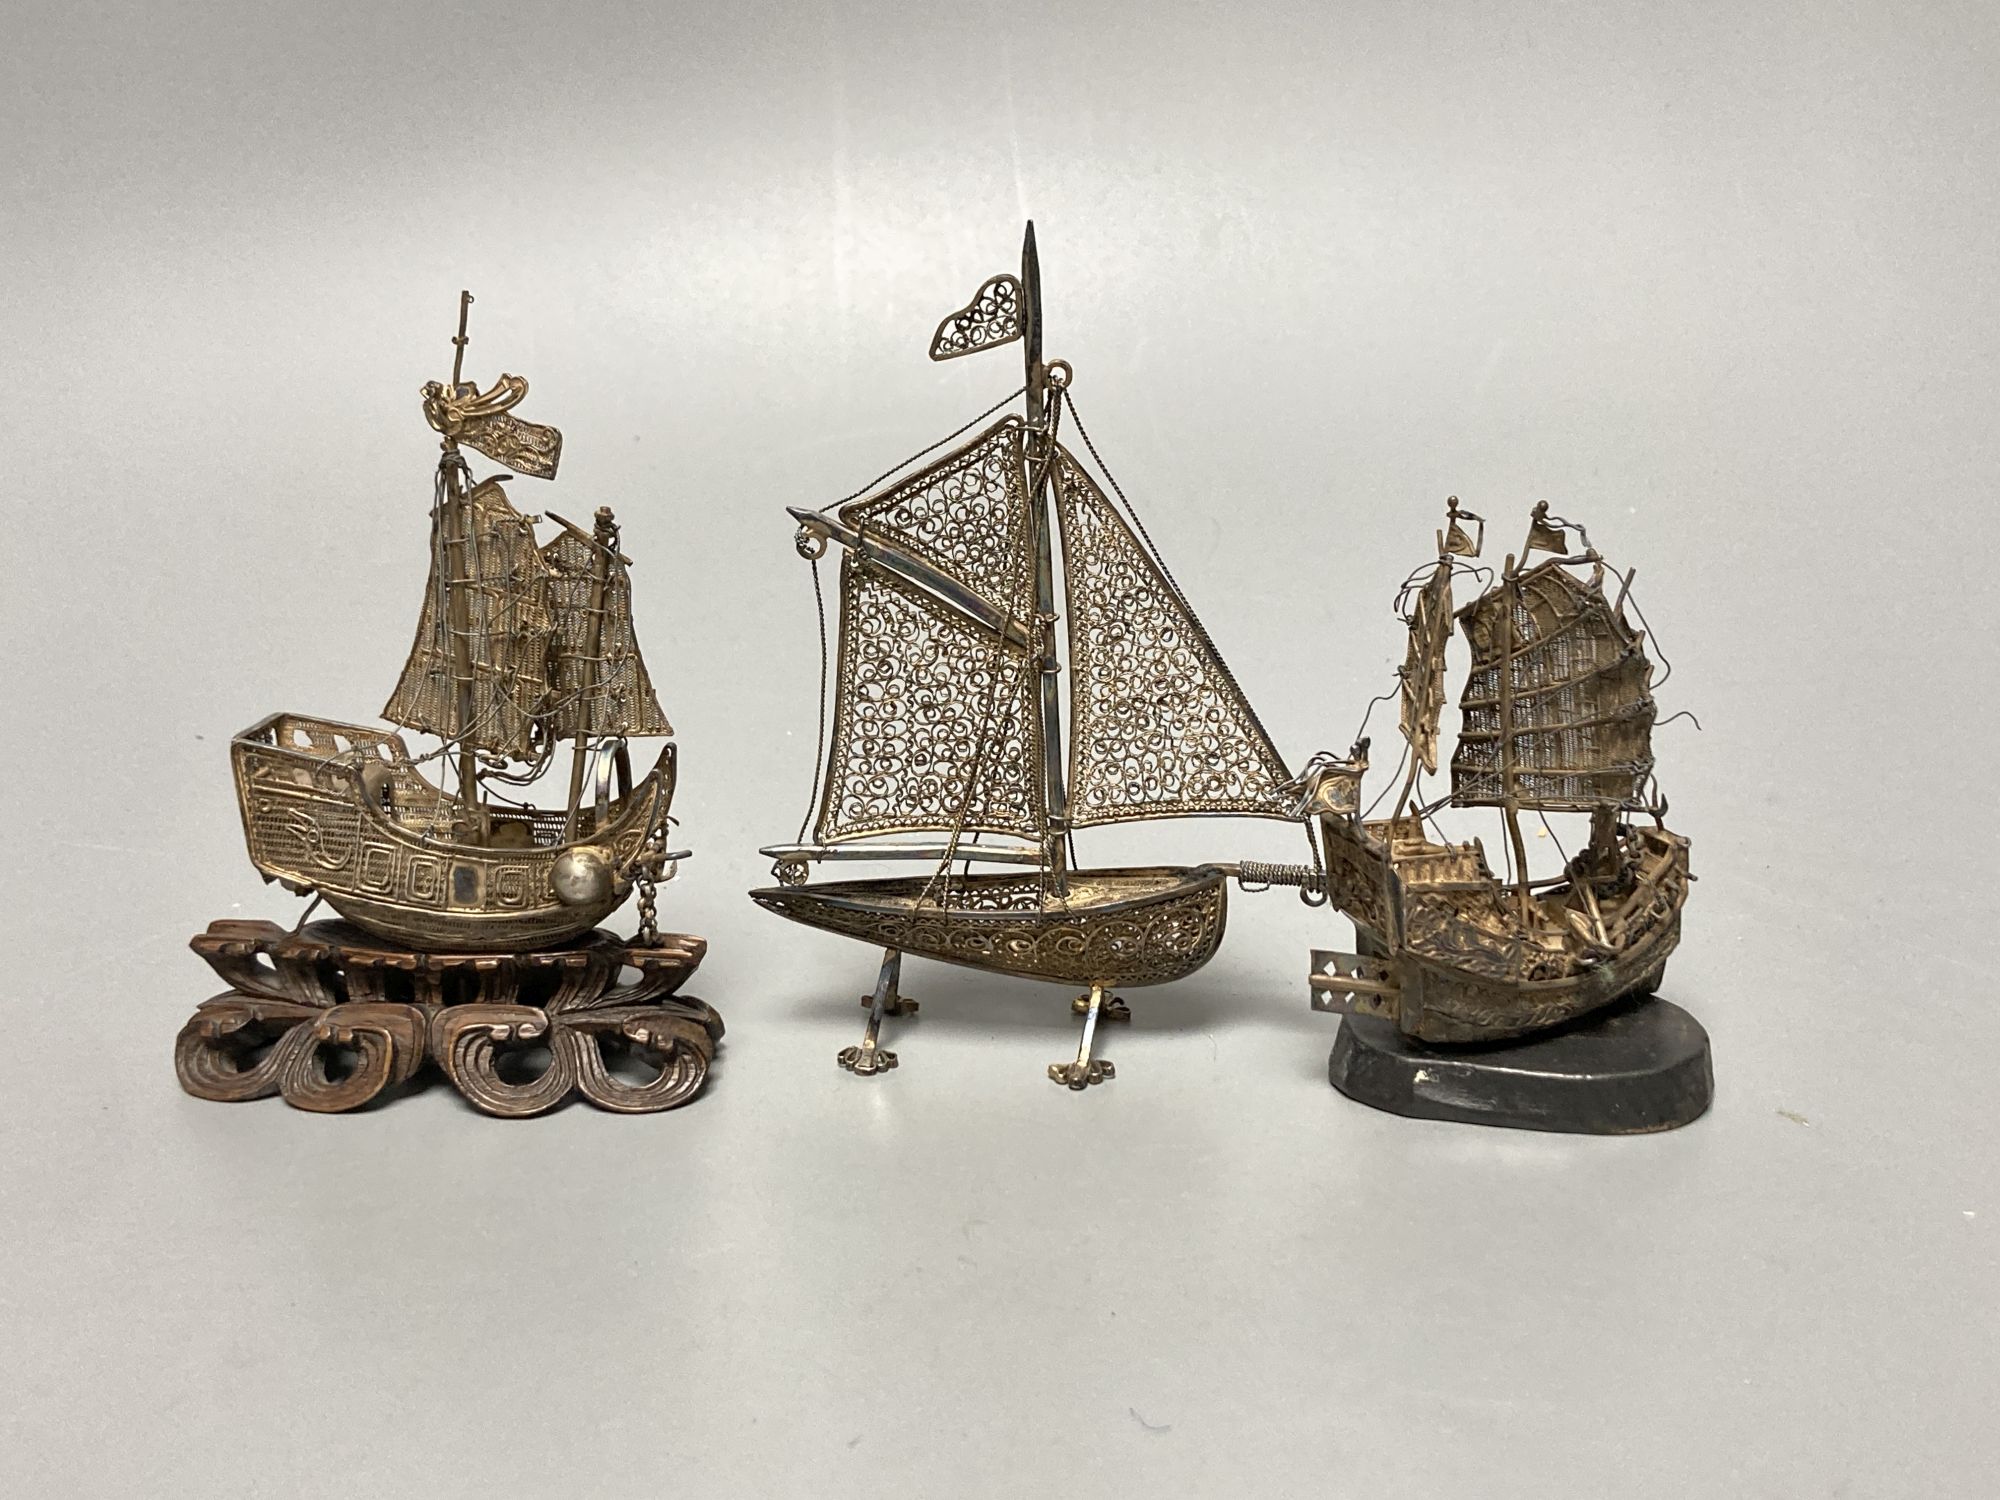 Three filigree boats, an enamelled flower pot and a snuff bottle